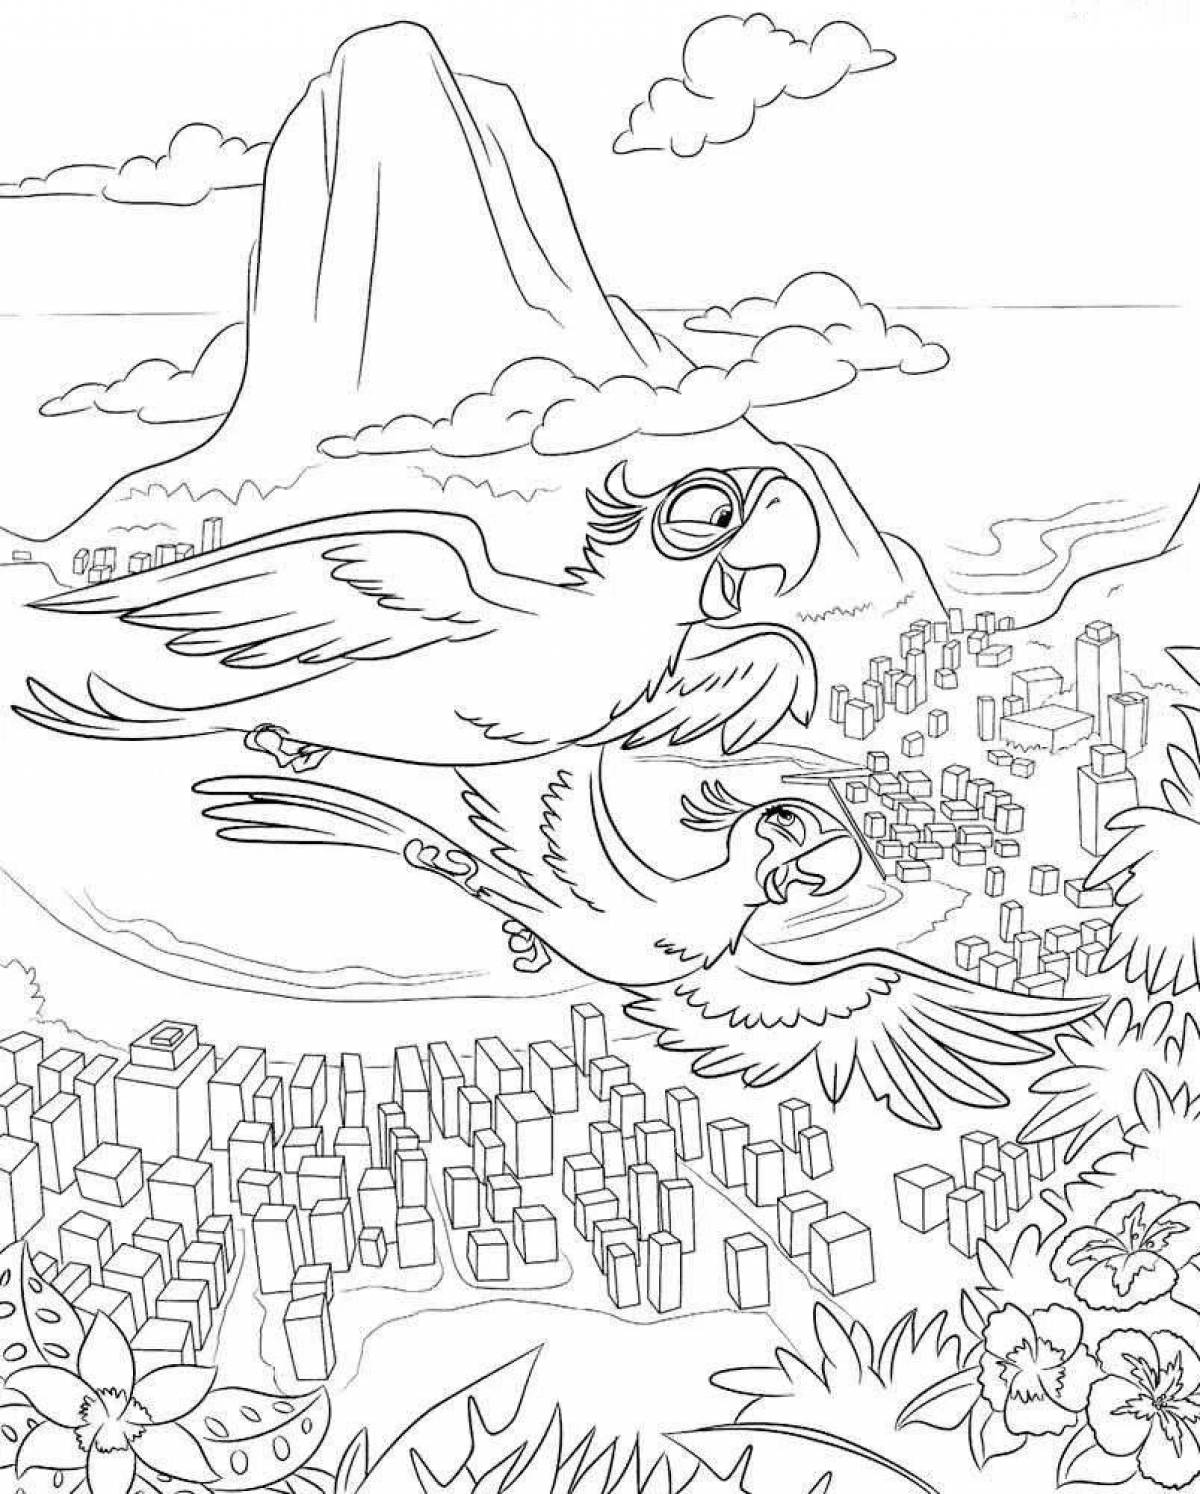 Color-frenzy rio coloring page